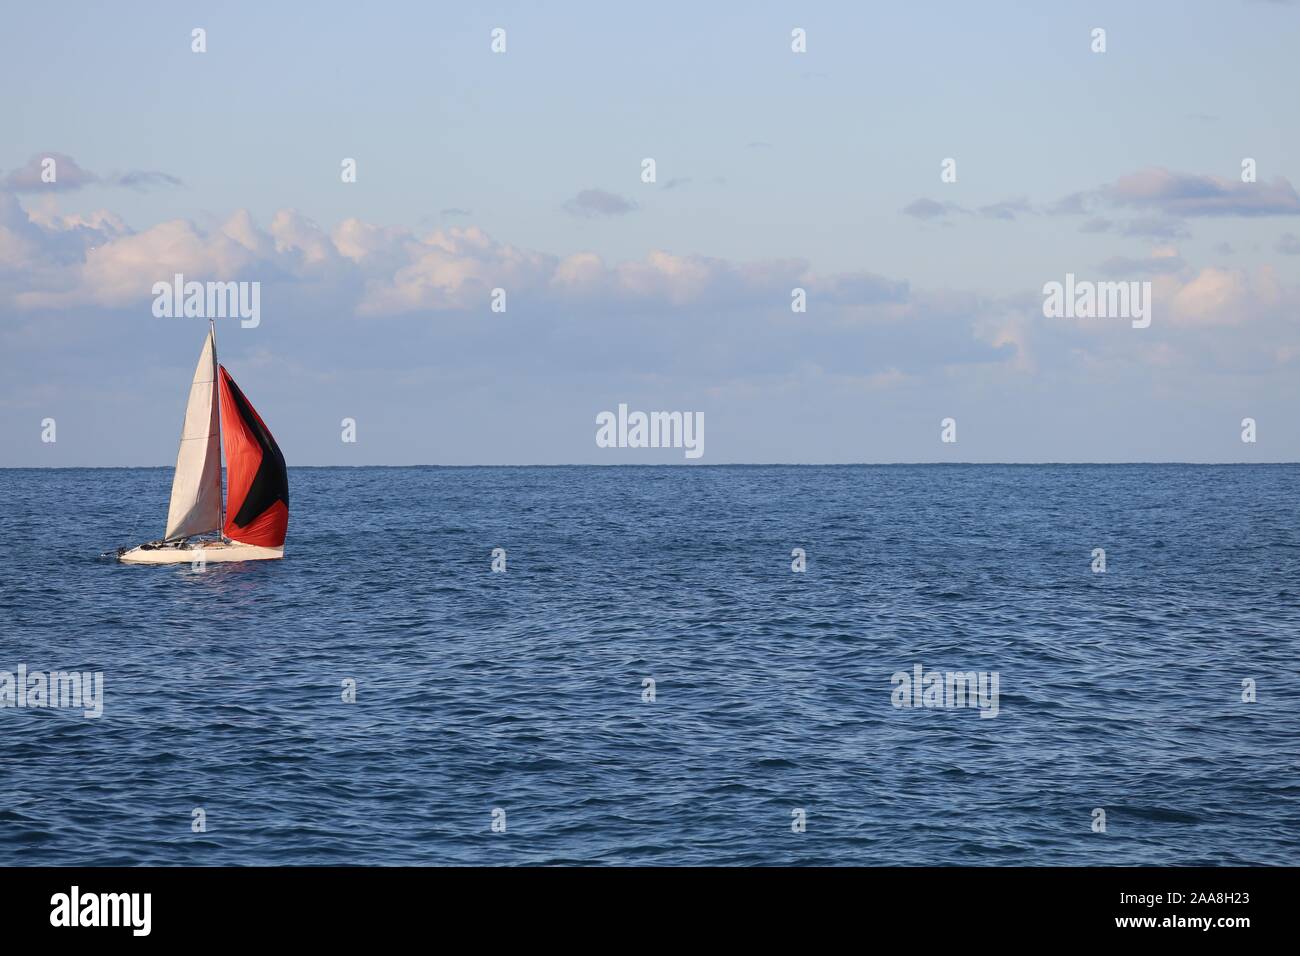 Red and white sailing boat on blue sea Stock Photo